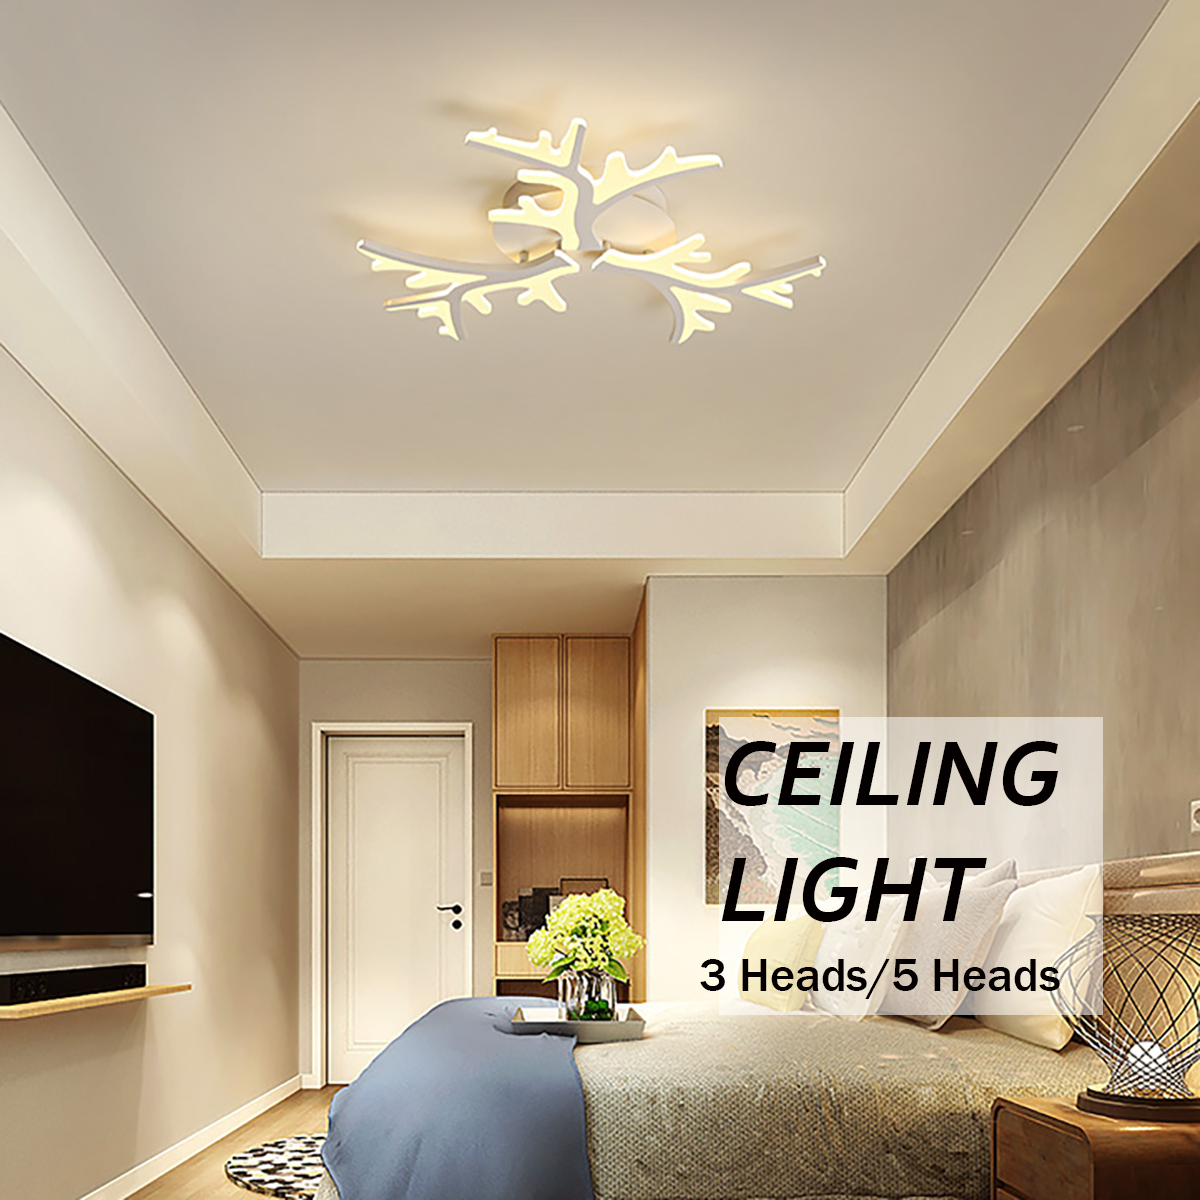 LED-Ceiling-Light-Pendant-Lamp-Hallway-Bedroom-Dimmable-Remote-Fixture-Decor-1795825-2